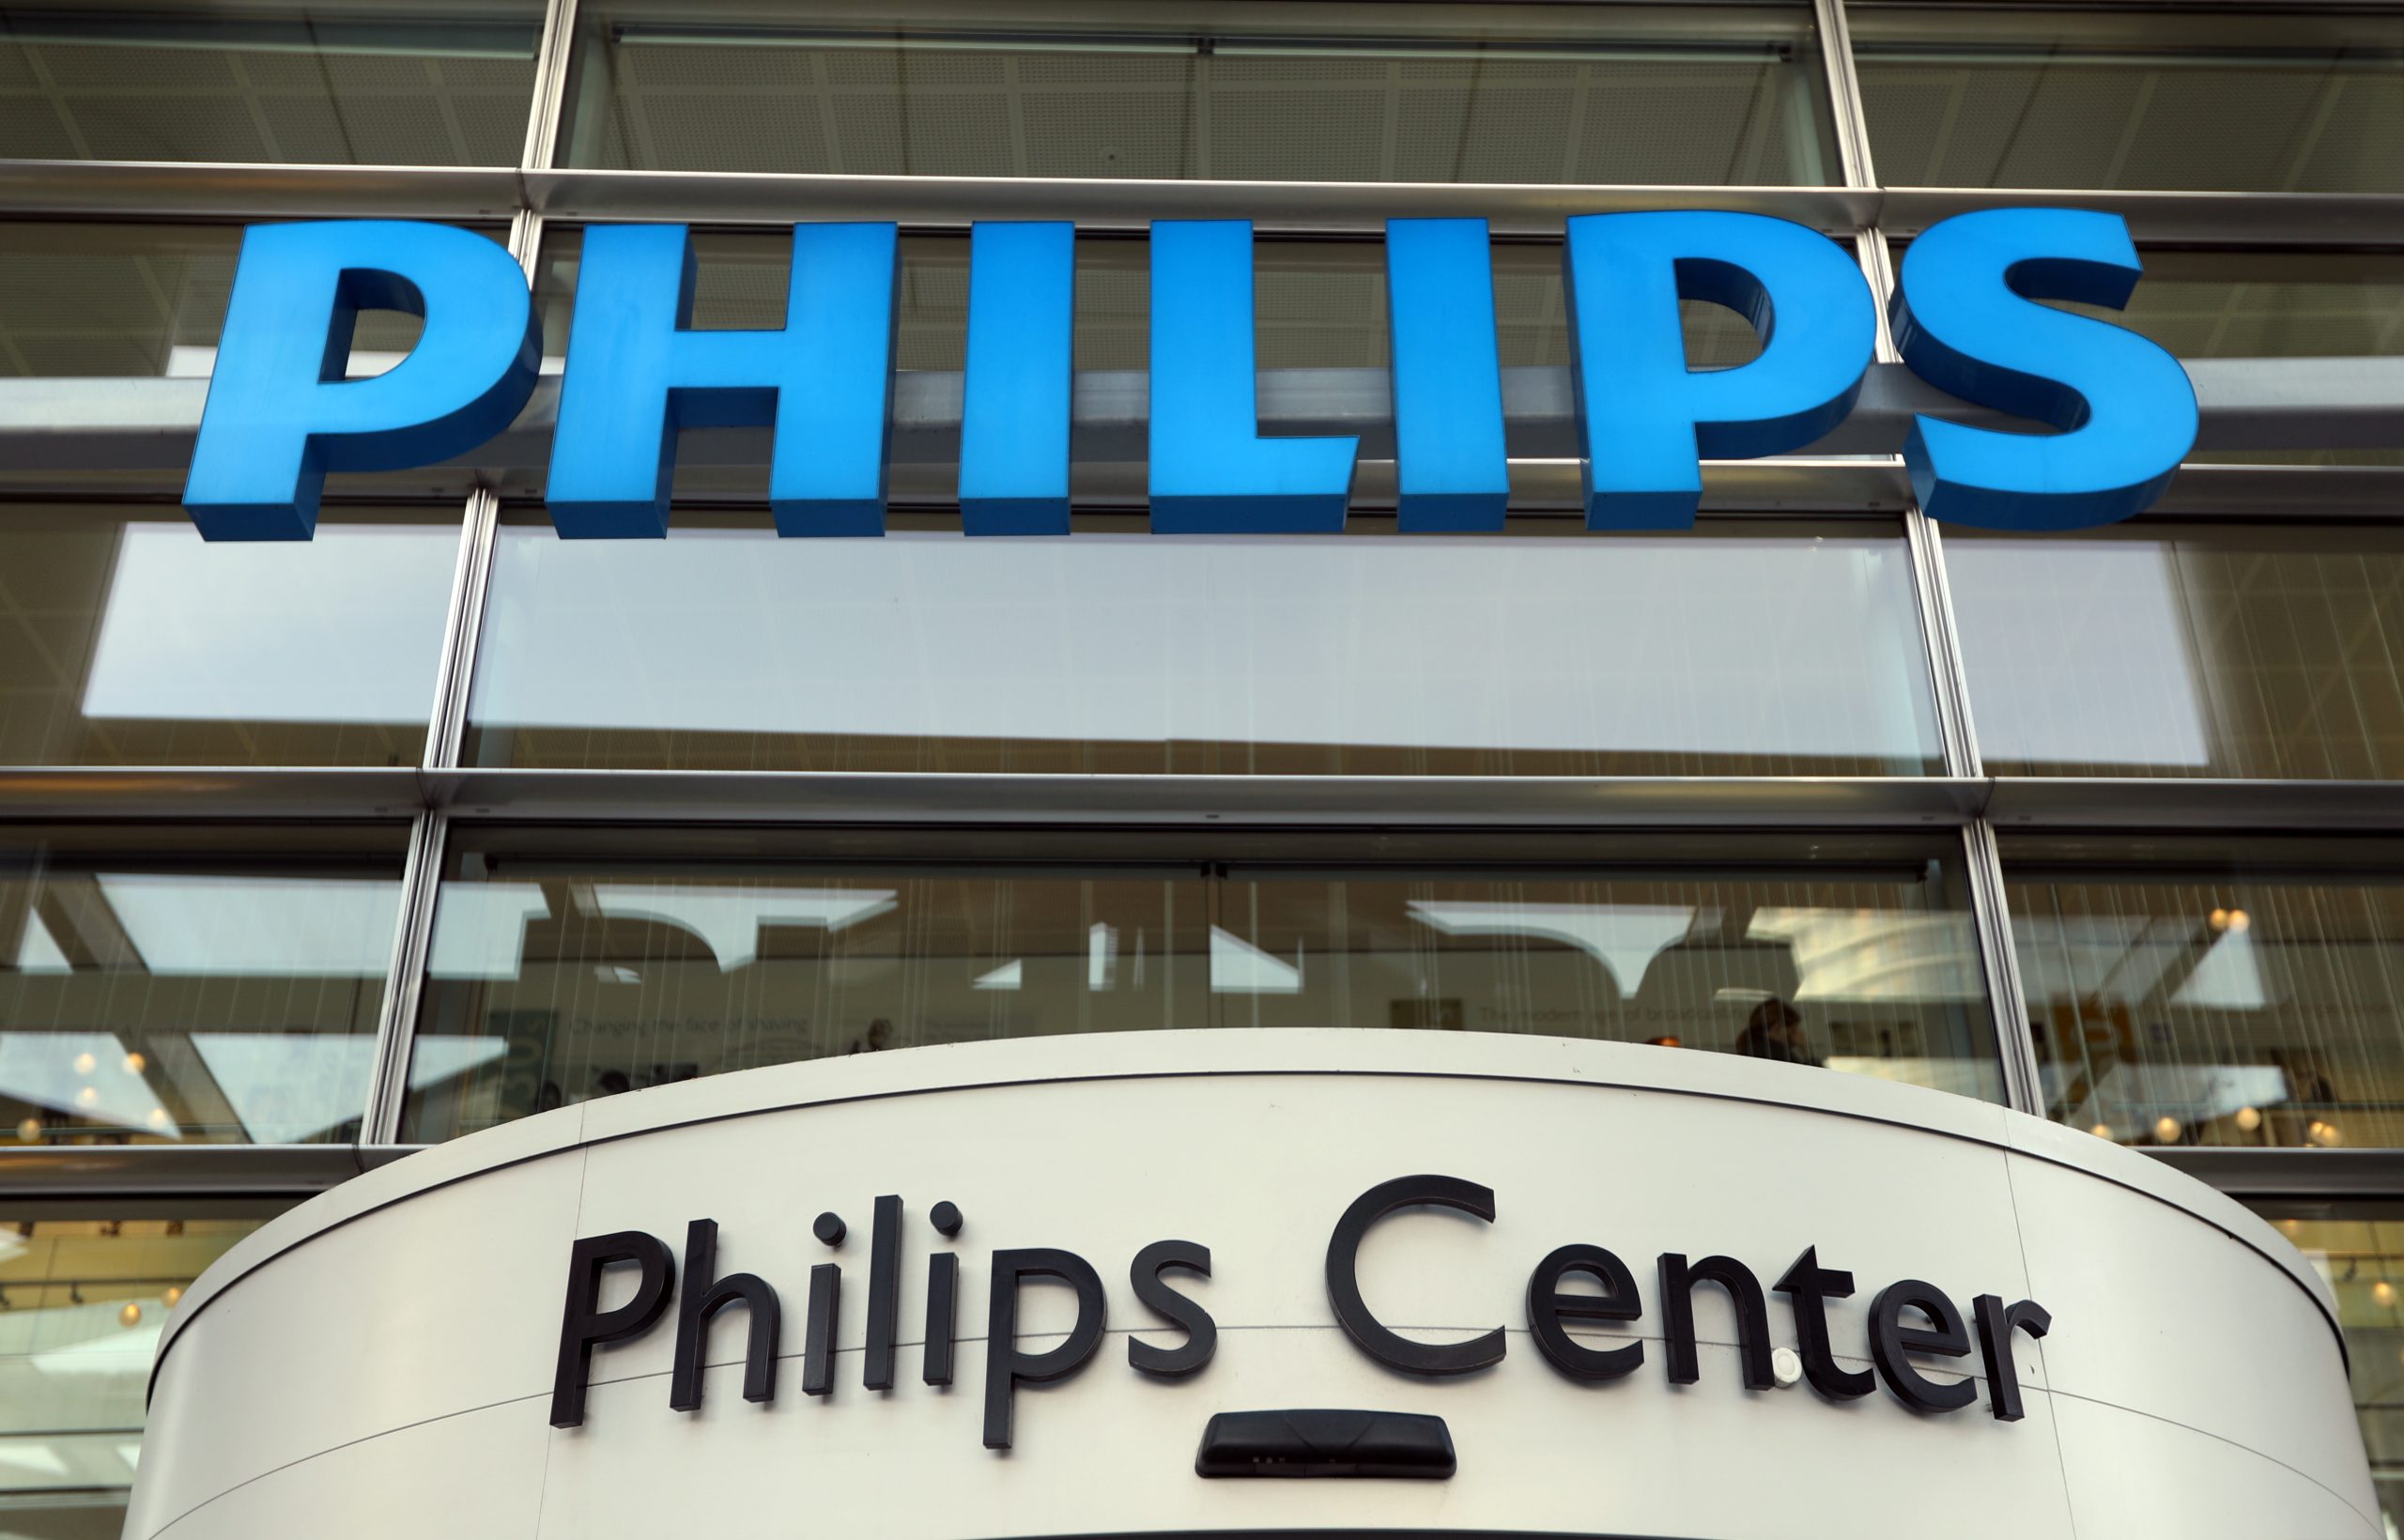 How to get the genuine experience: Choose the right Philips authorized dealer?